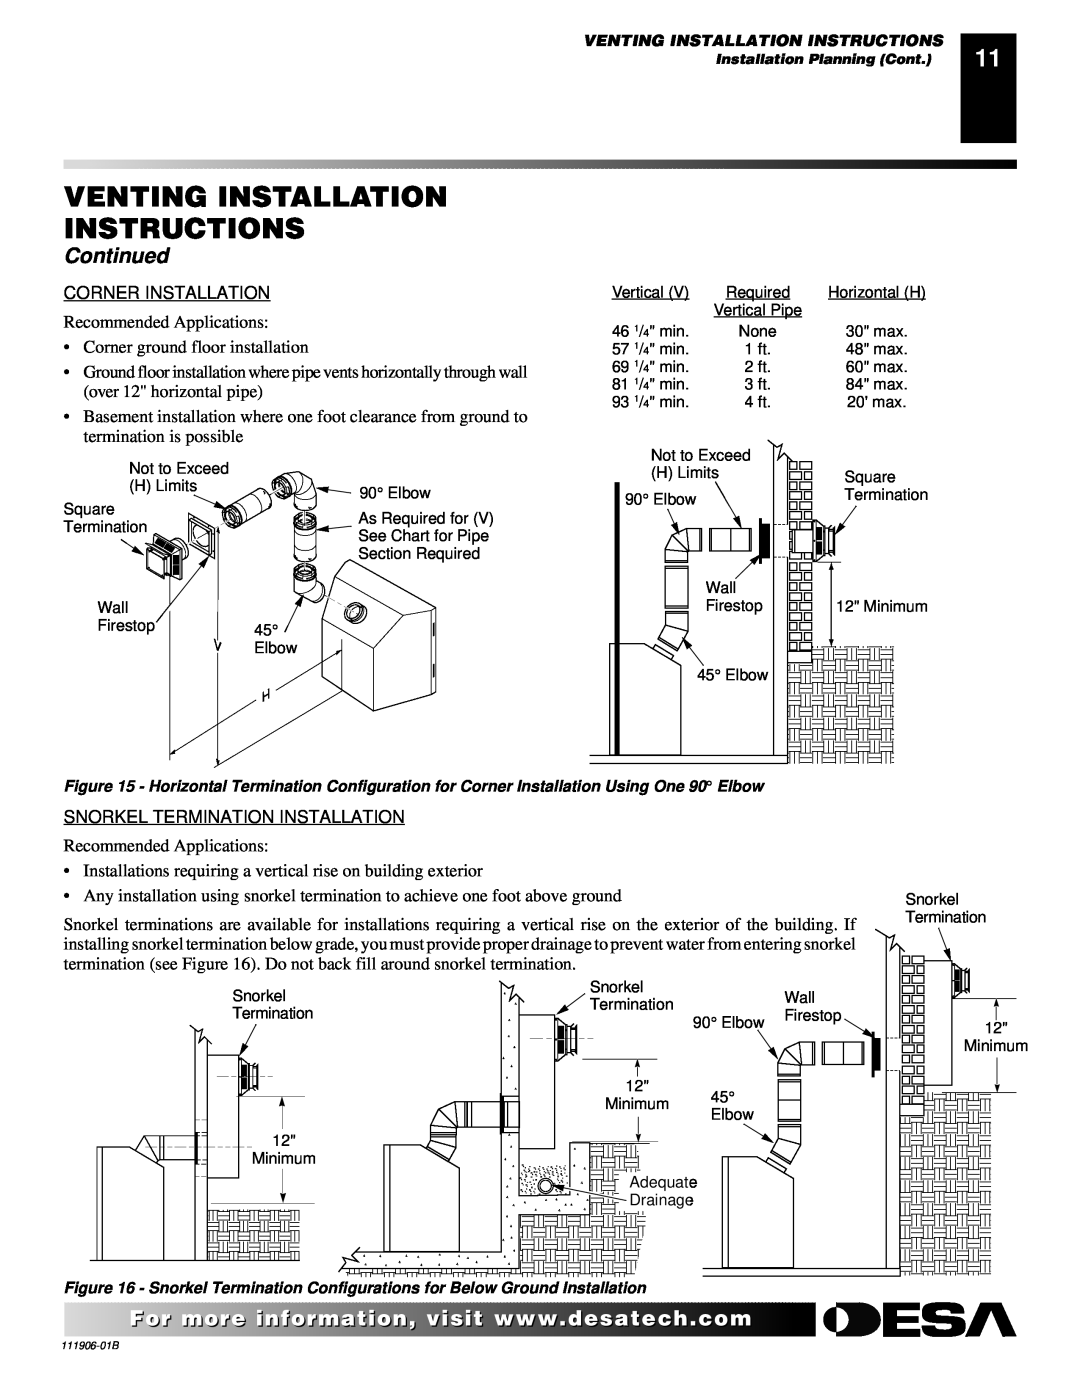 Desa CHDV42NRA, (V)V42PA(1) installation manual Venting Installation Instructions, Continued, Recommended Applications 